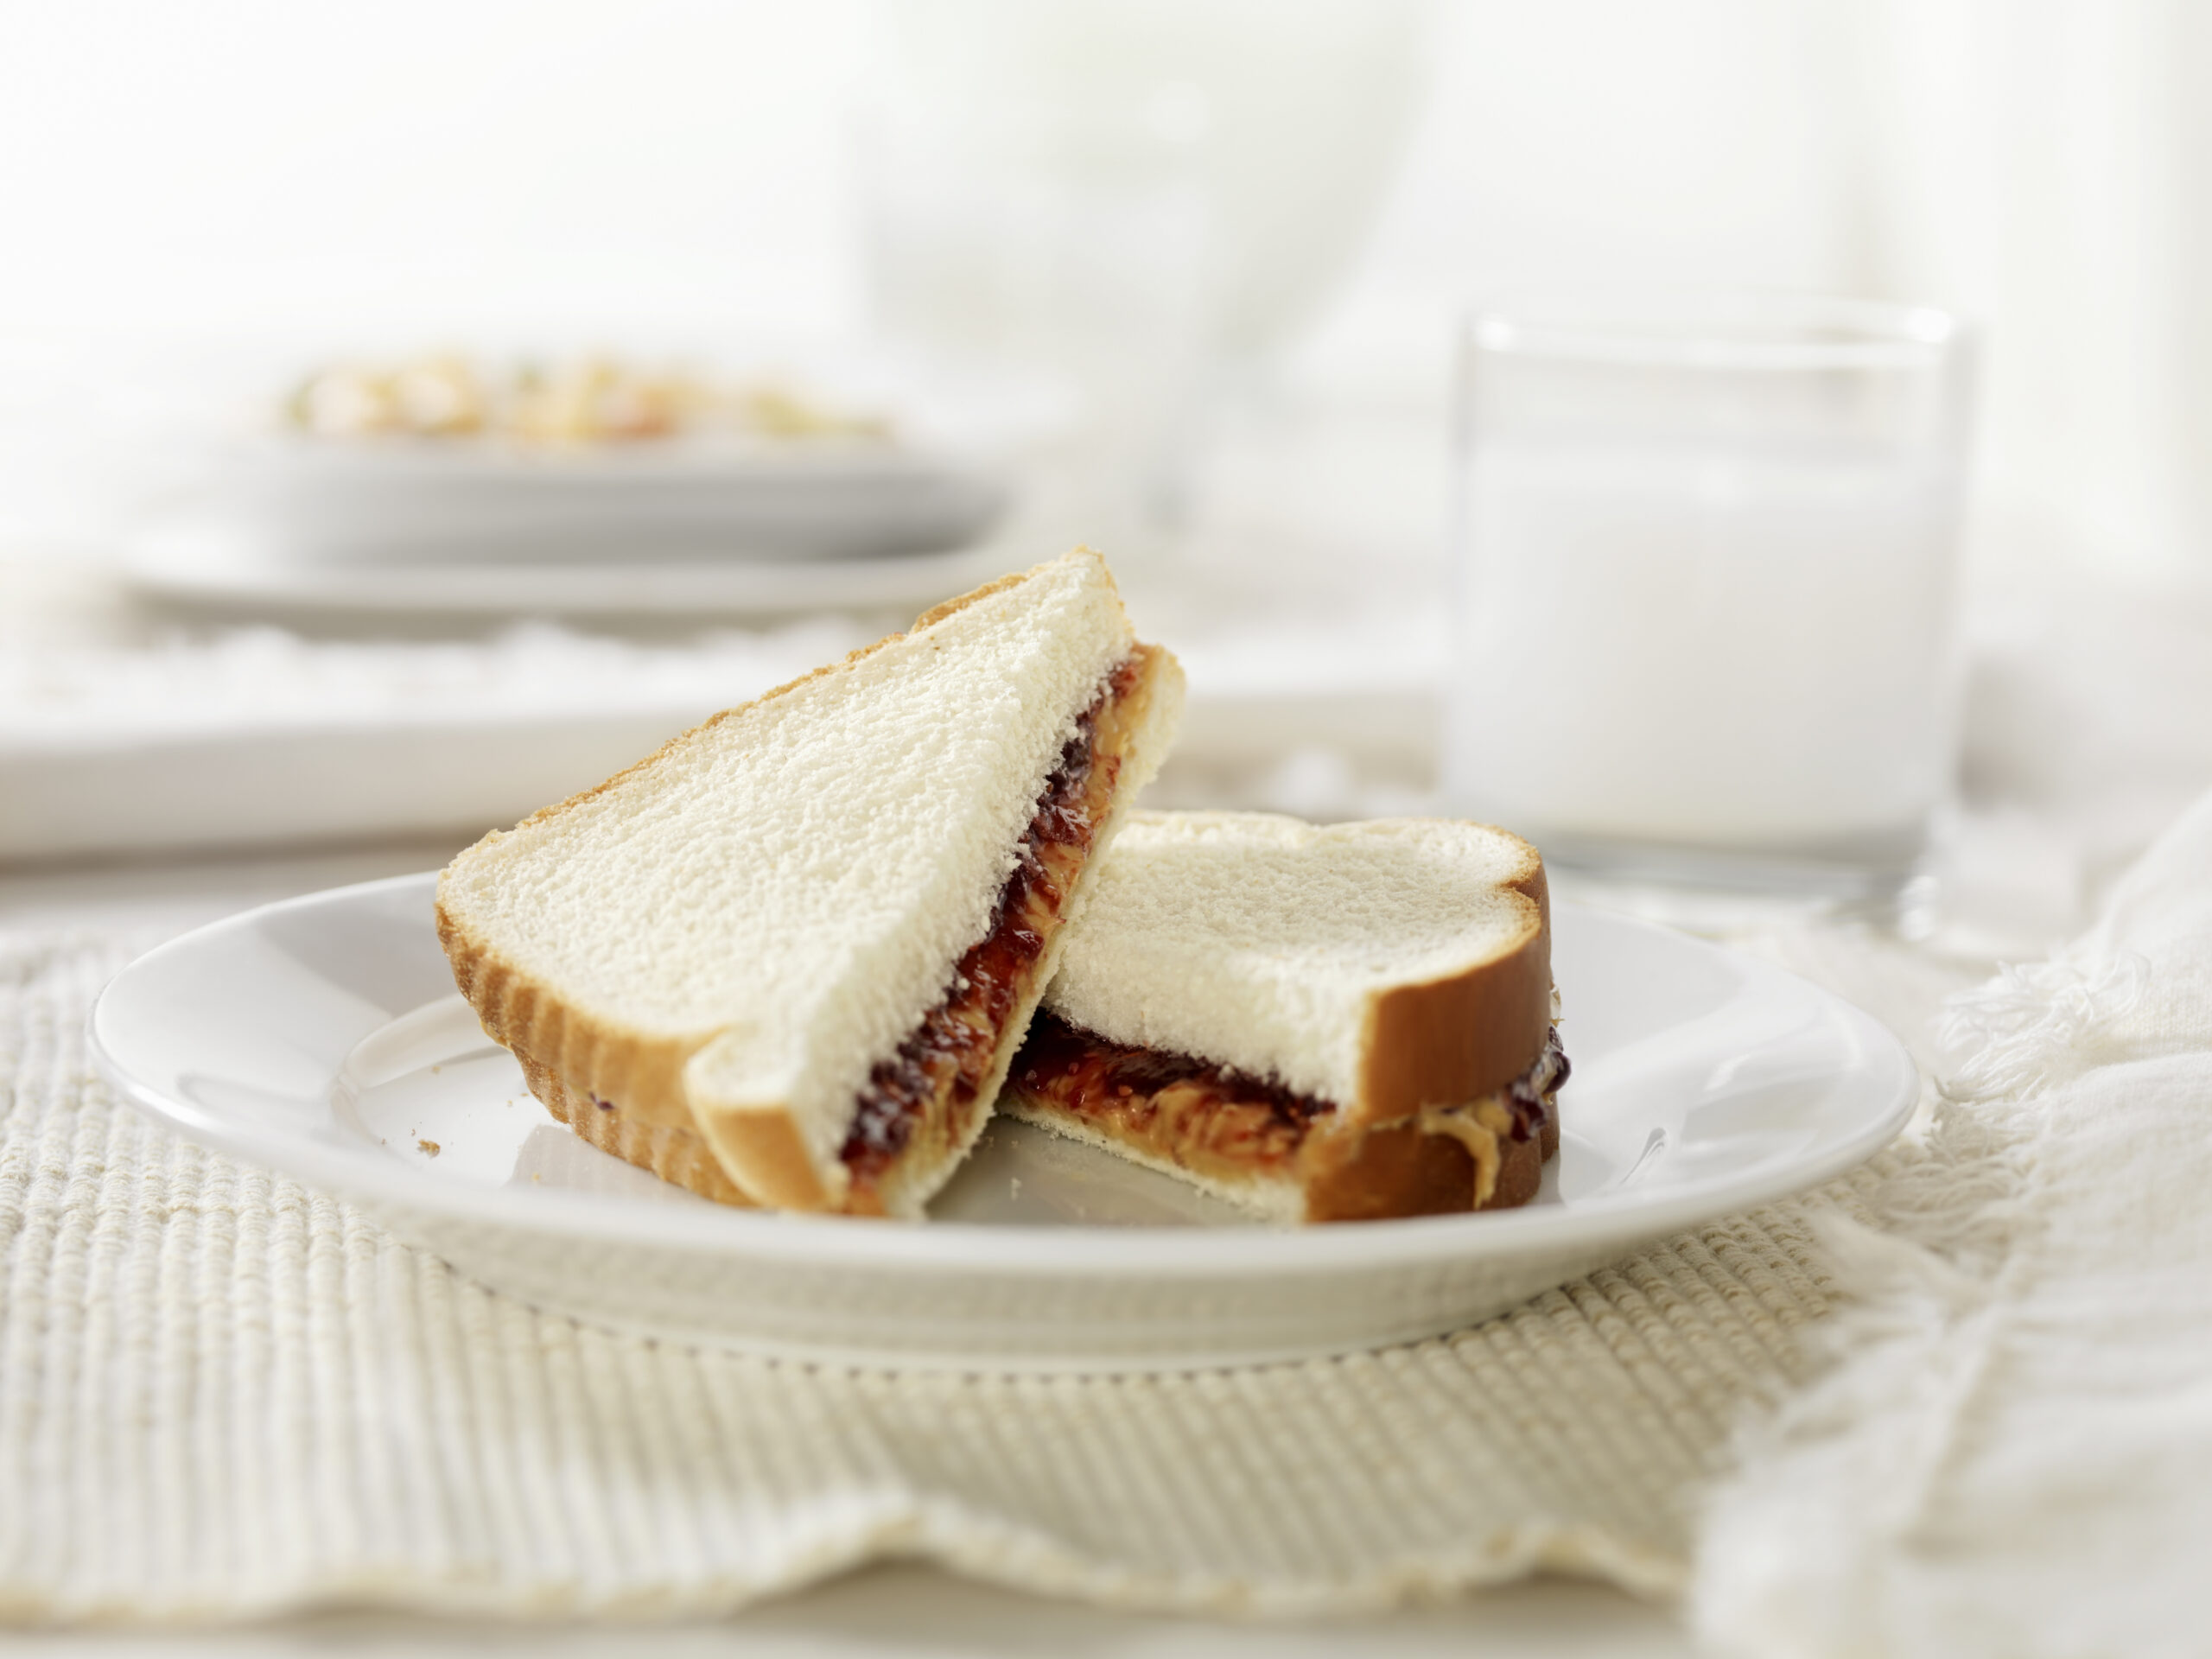 Peanut Butter and Jam Sandwich-Photographed on Hasselblad H3D2-39mb Camera